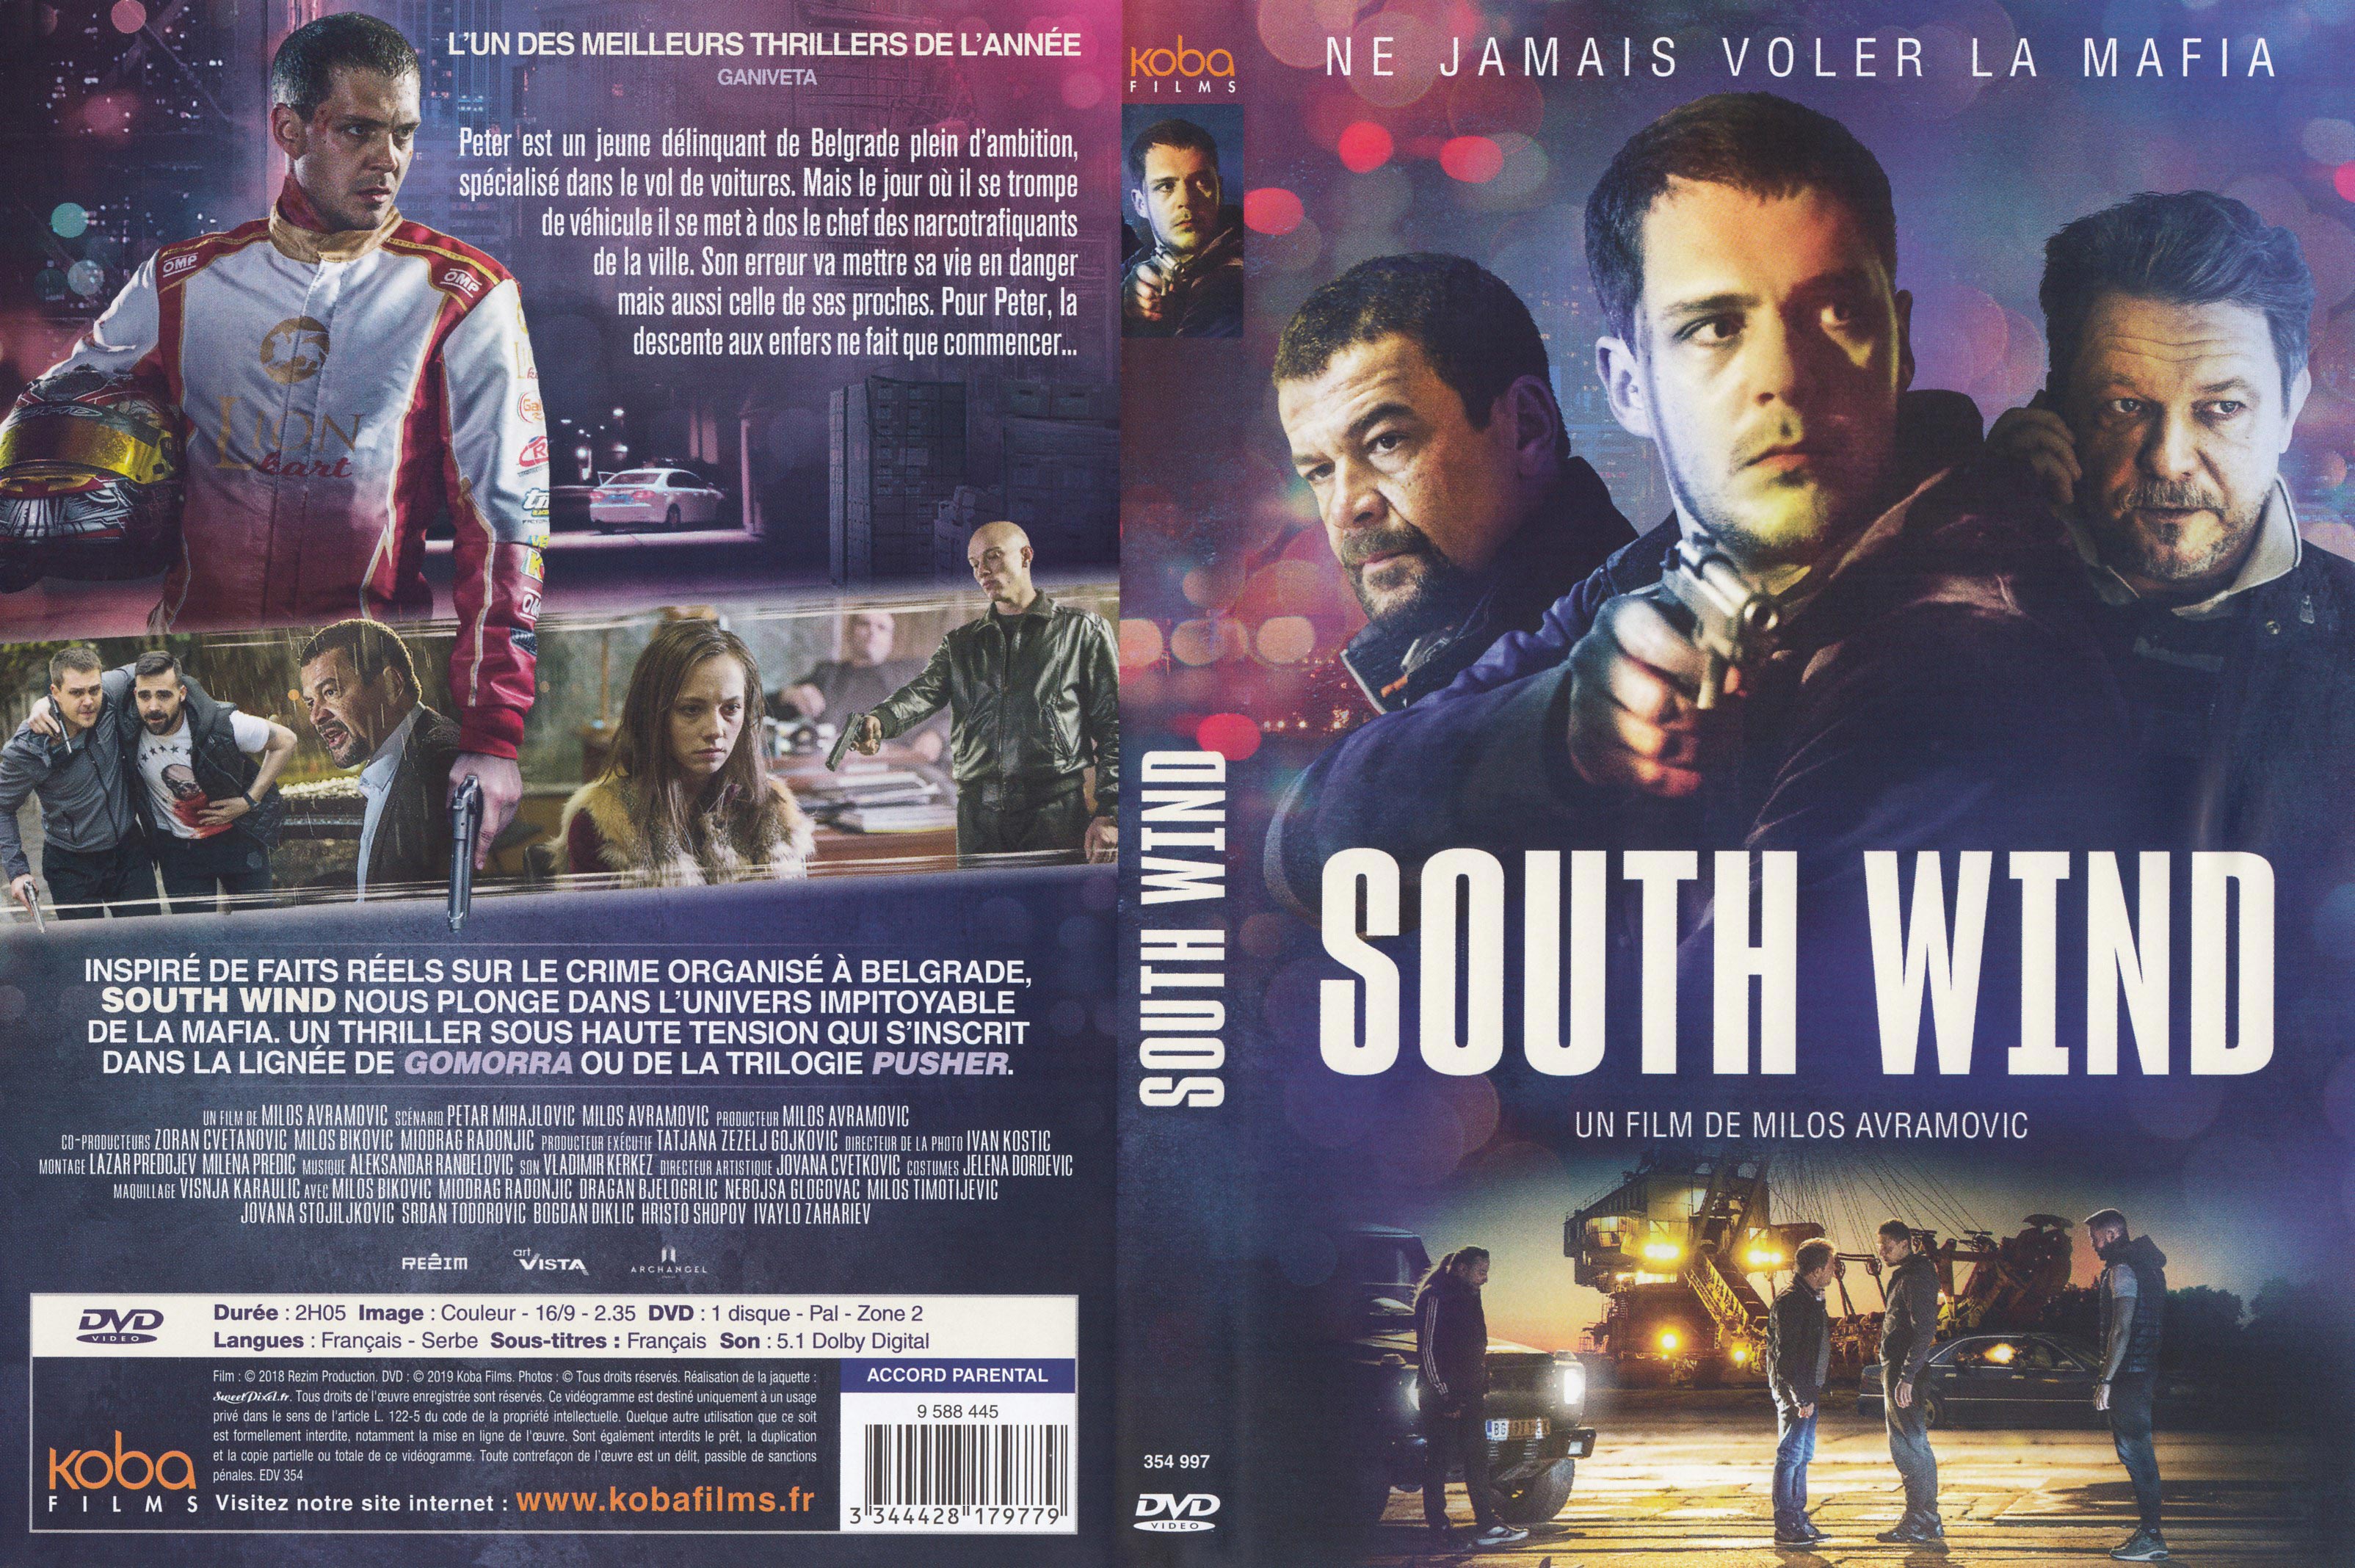 Jaquette DVD South wind